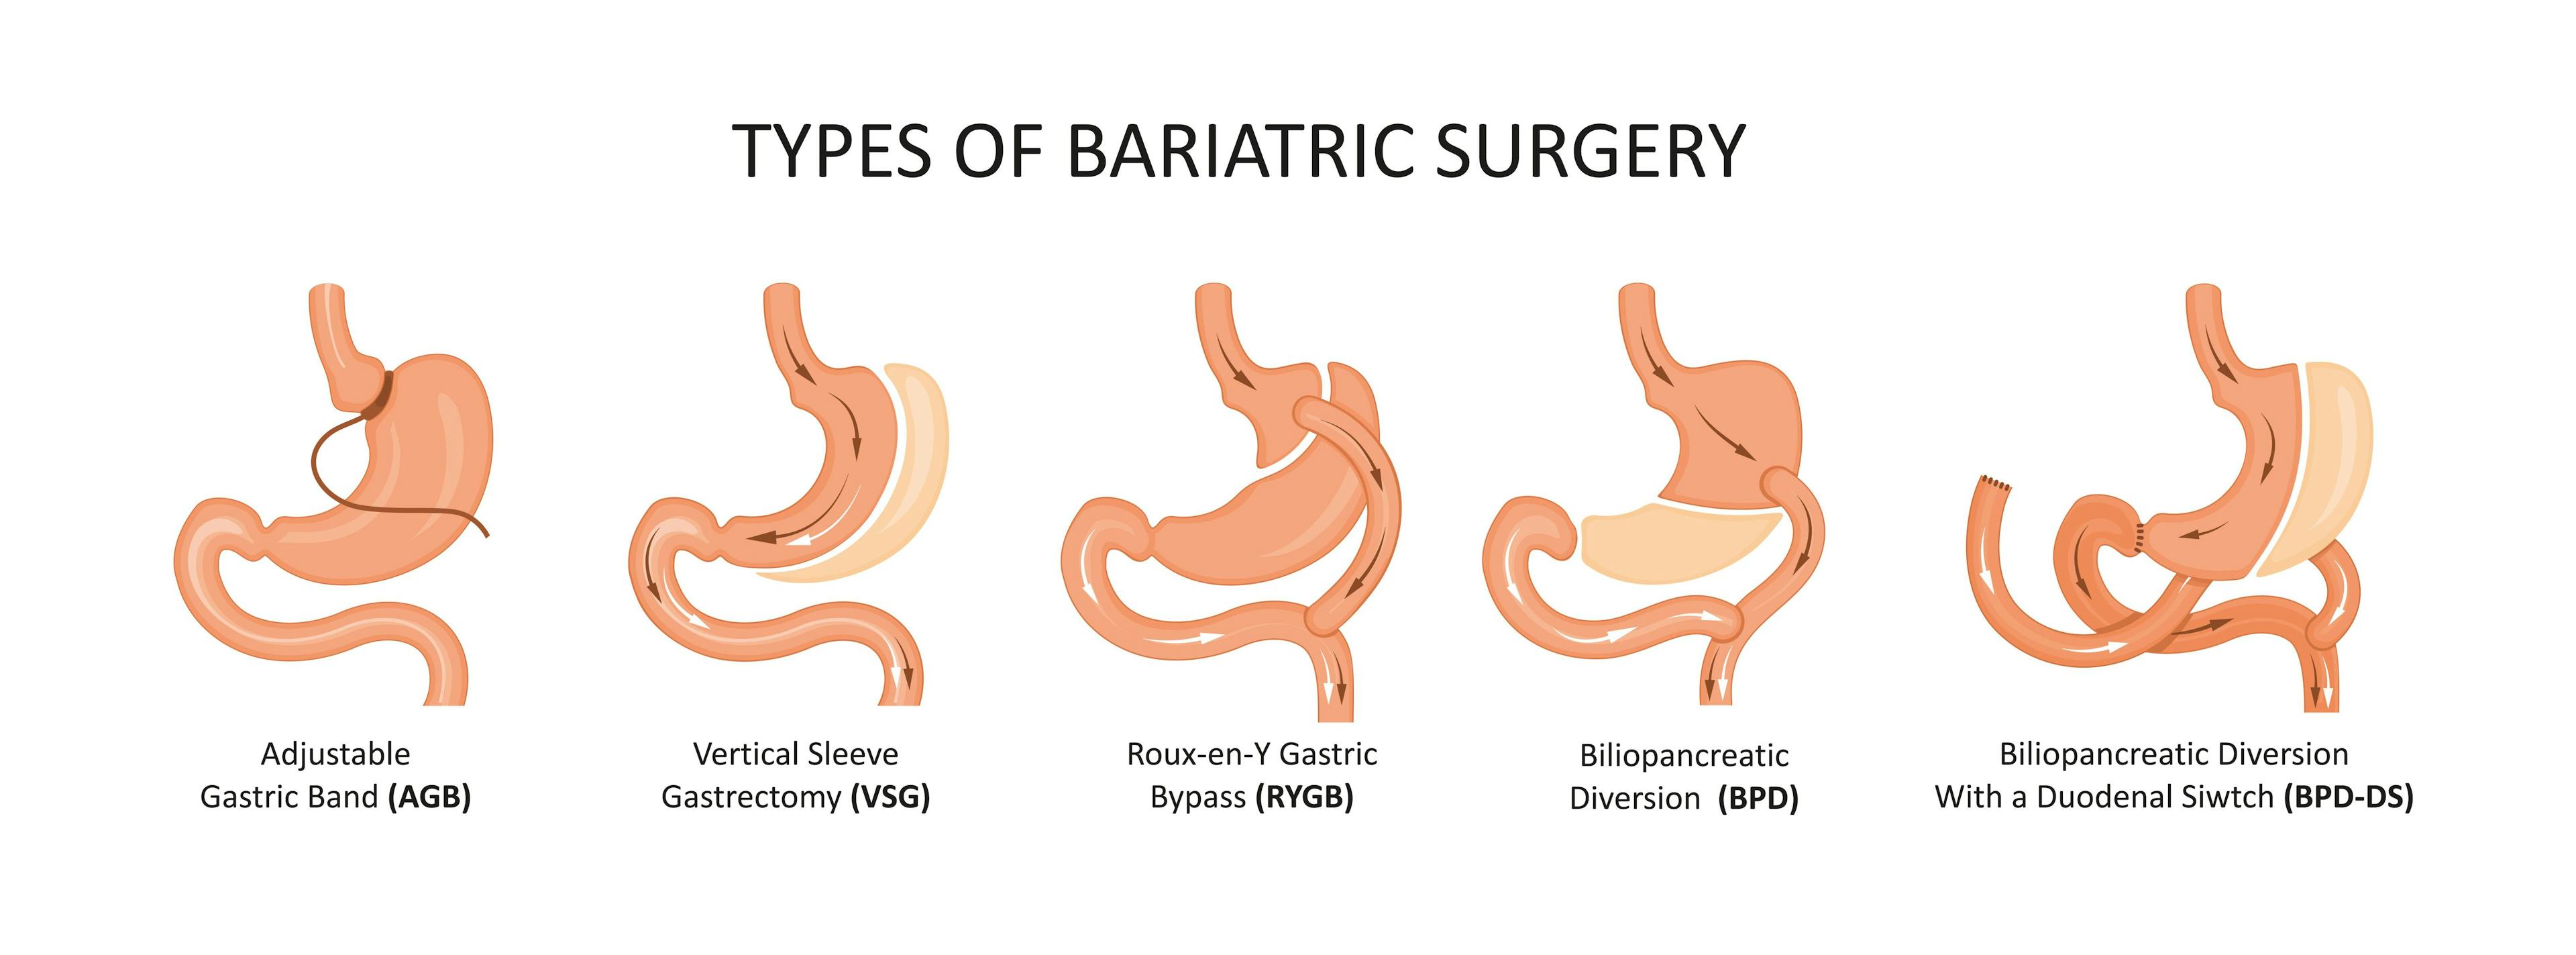 Types of bariatric surgery. Stomach reduction | Image credit: © nmfotograf - © stock.adobe.com